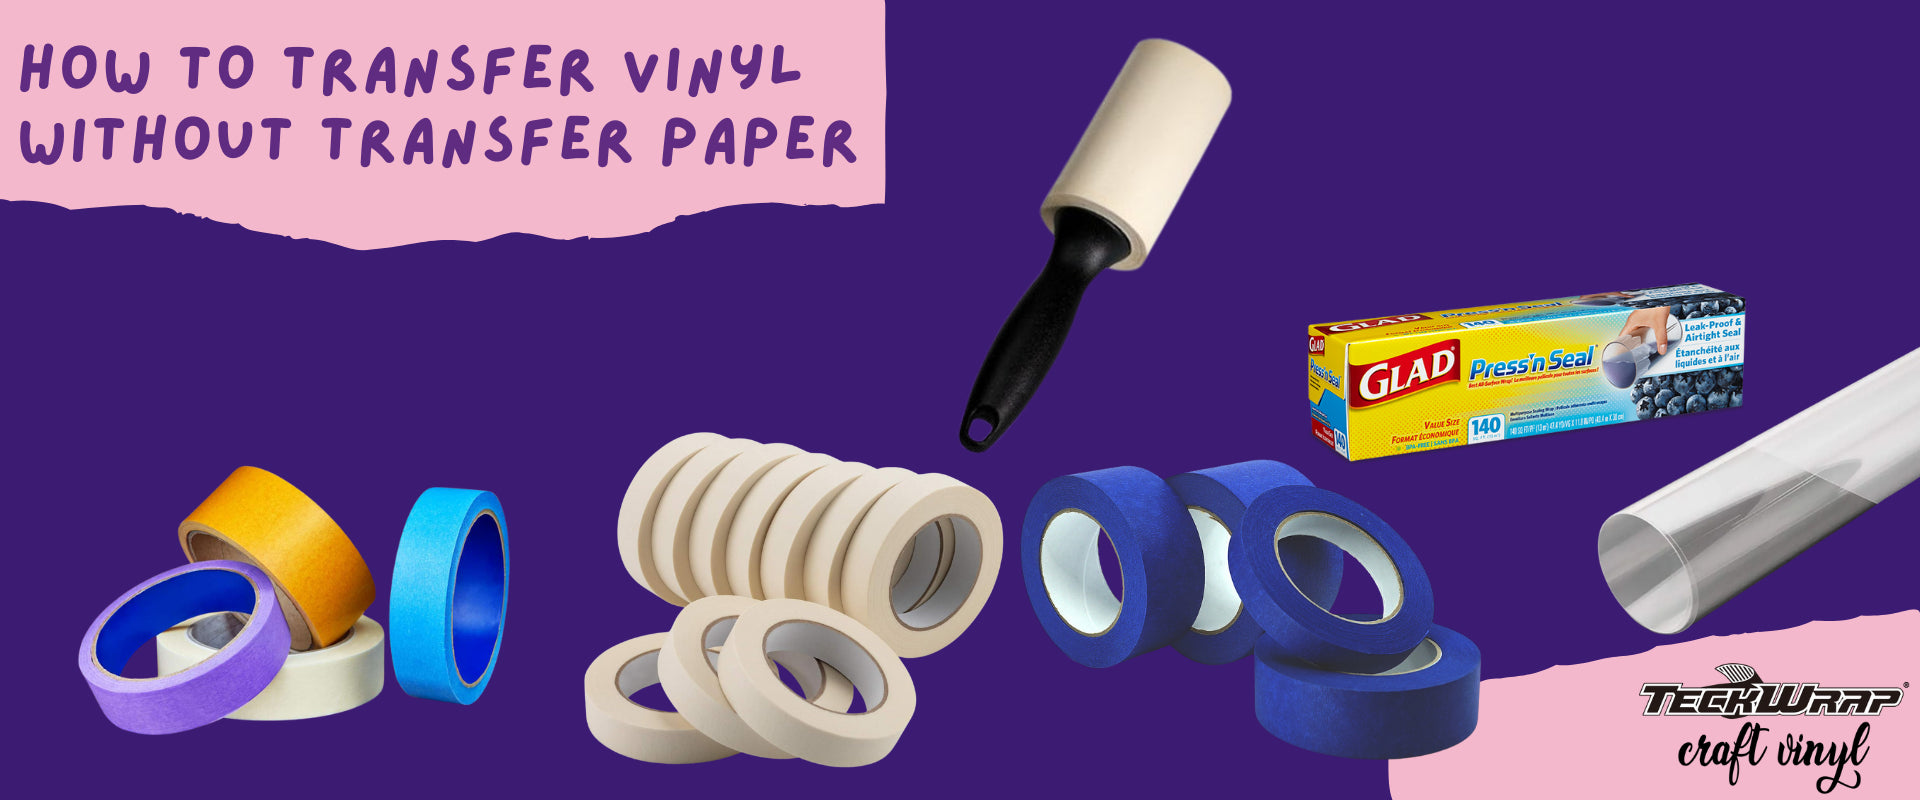 Which things i can use instead of transfer paper or tape